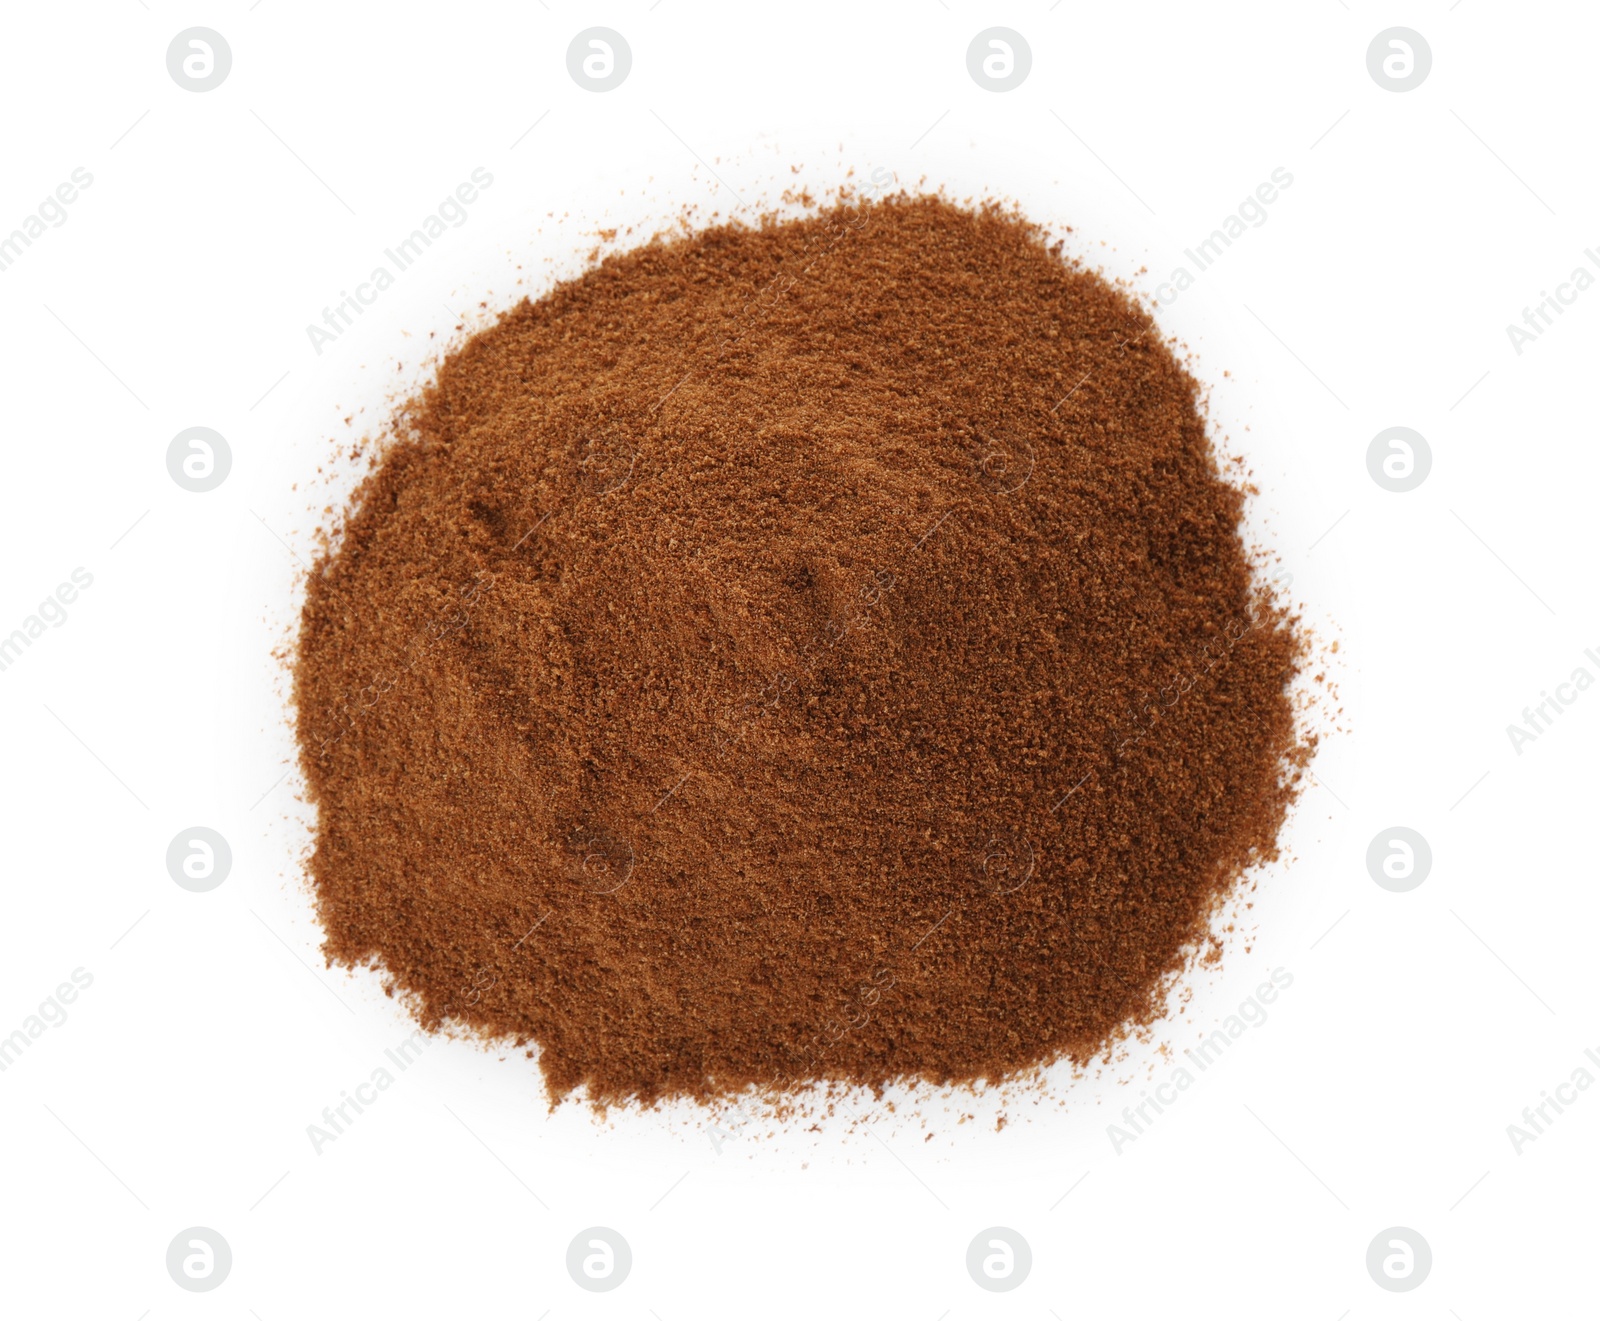 Photo of Pile of chicory powder on white background, top view